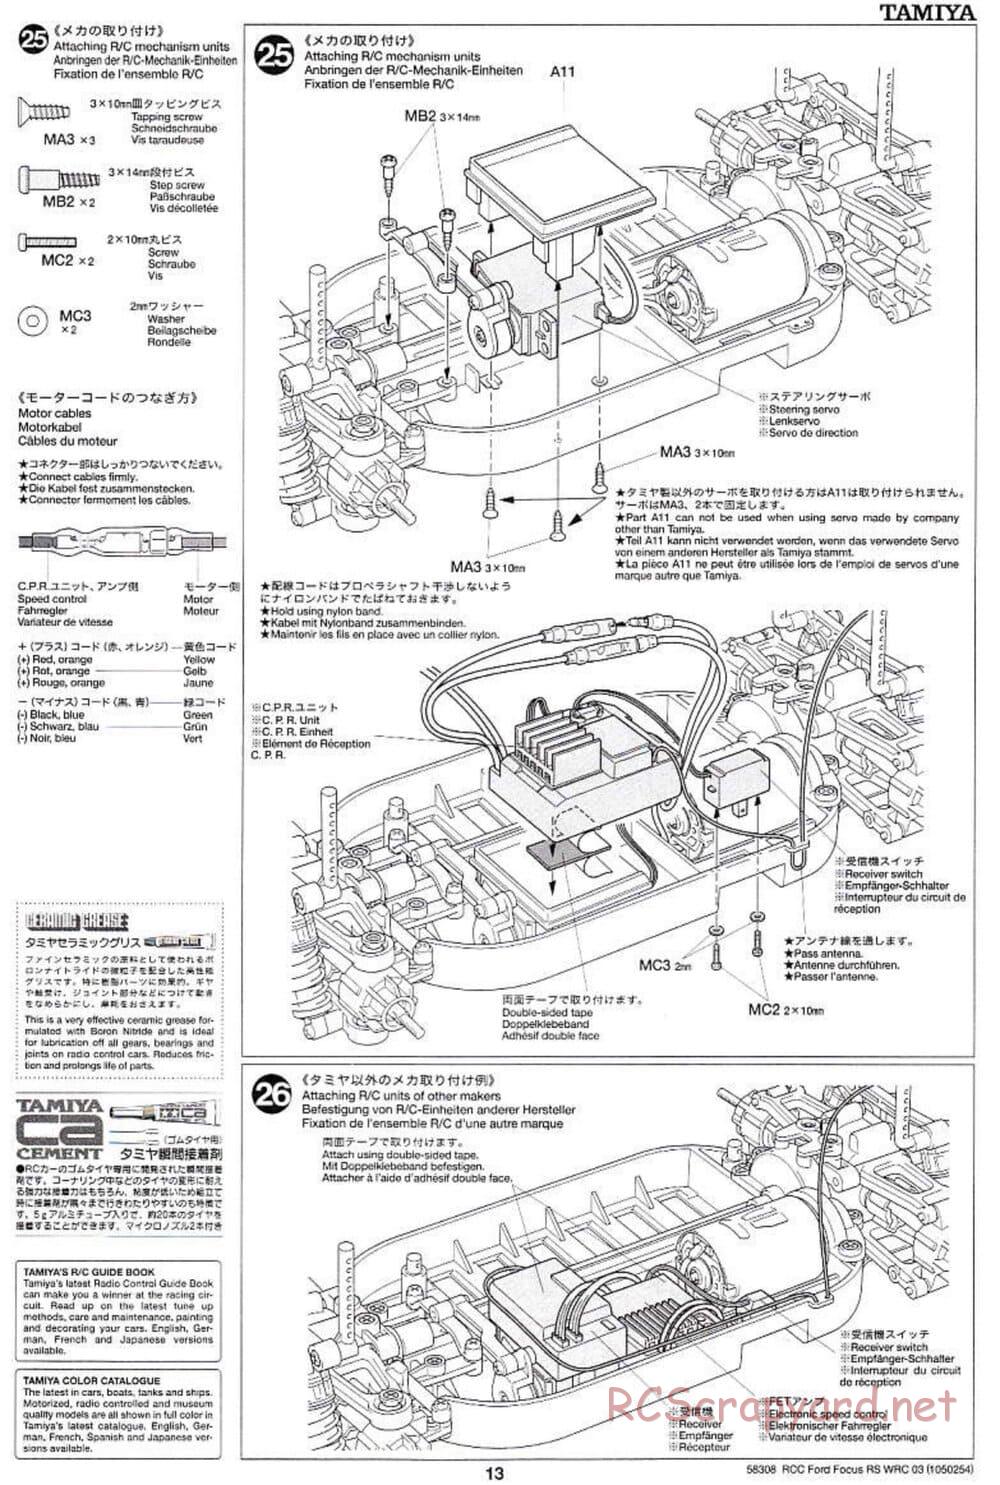 Tamiya - Ford Focus RS WRC 03 - TT-01 Chassis - Manual - Page 13